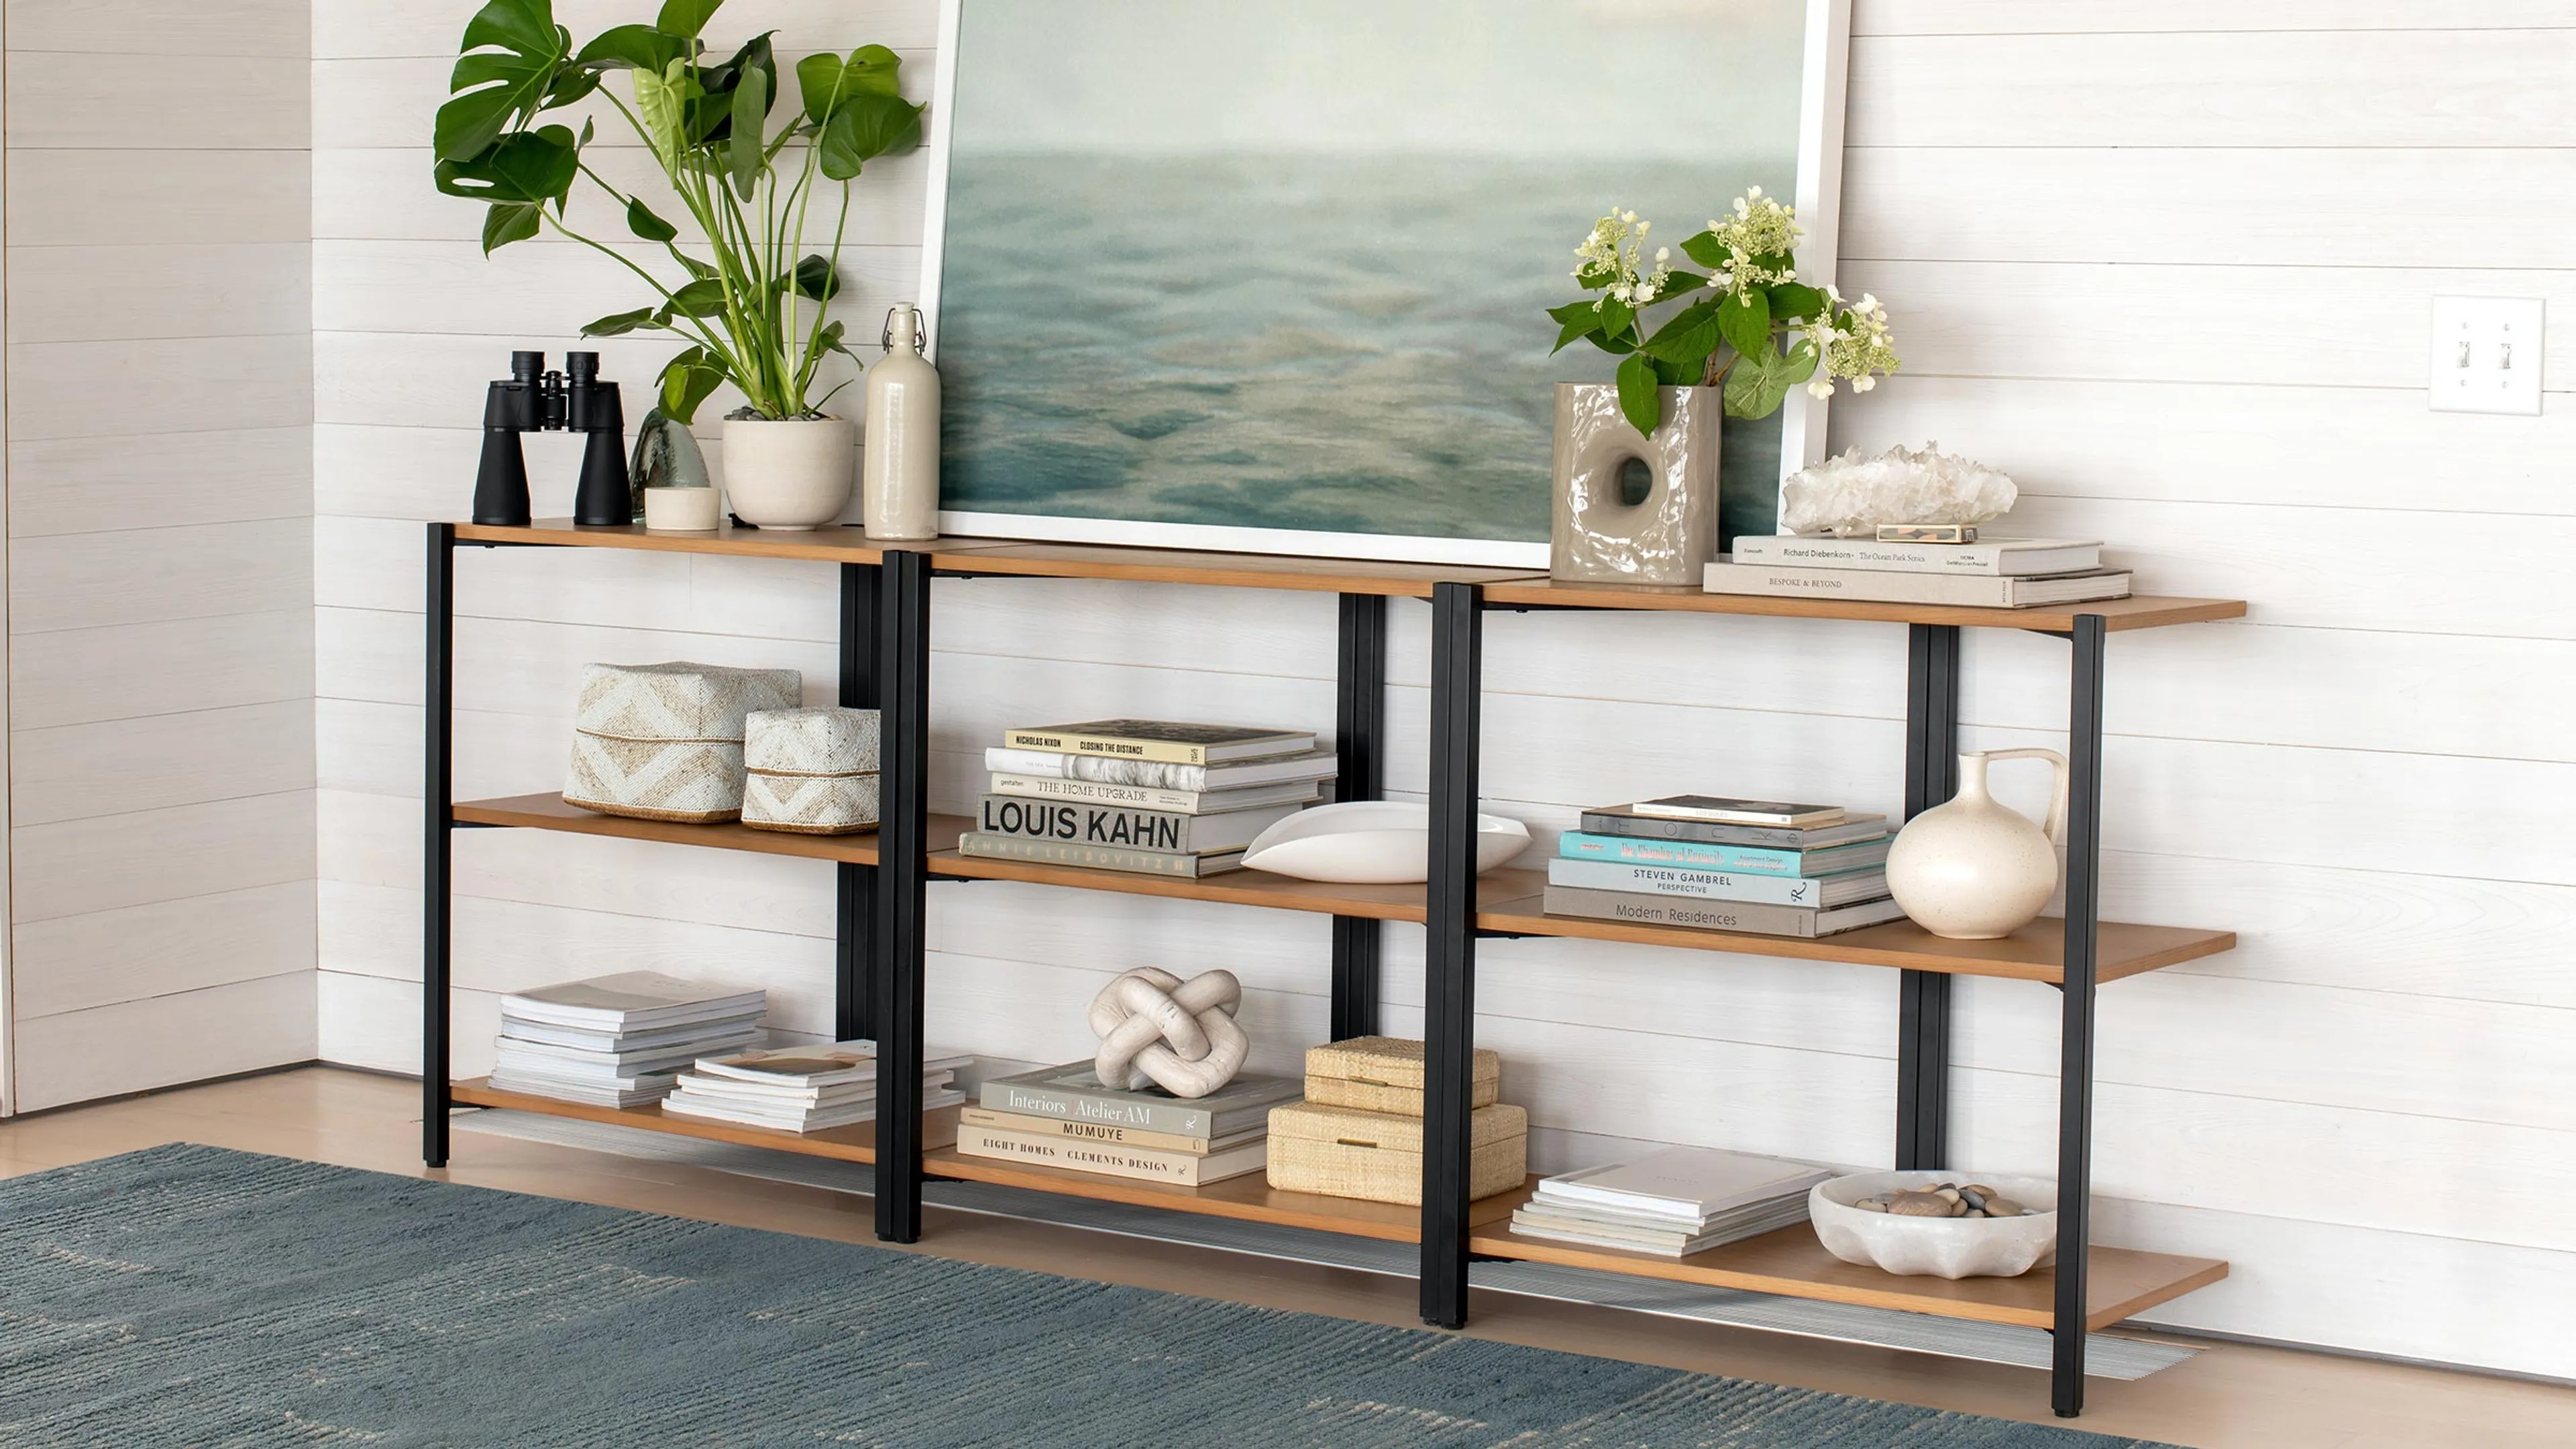 Canon Low & Tall Shelves